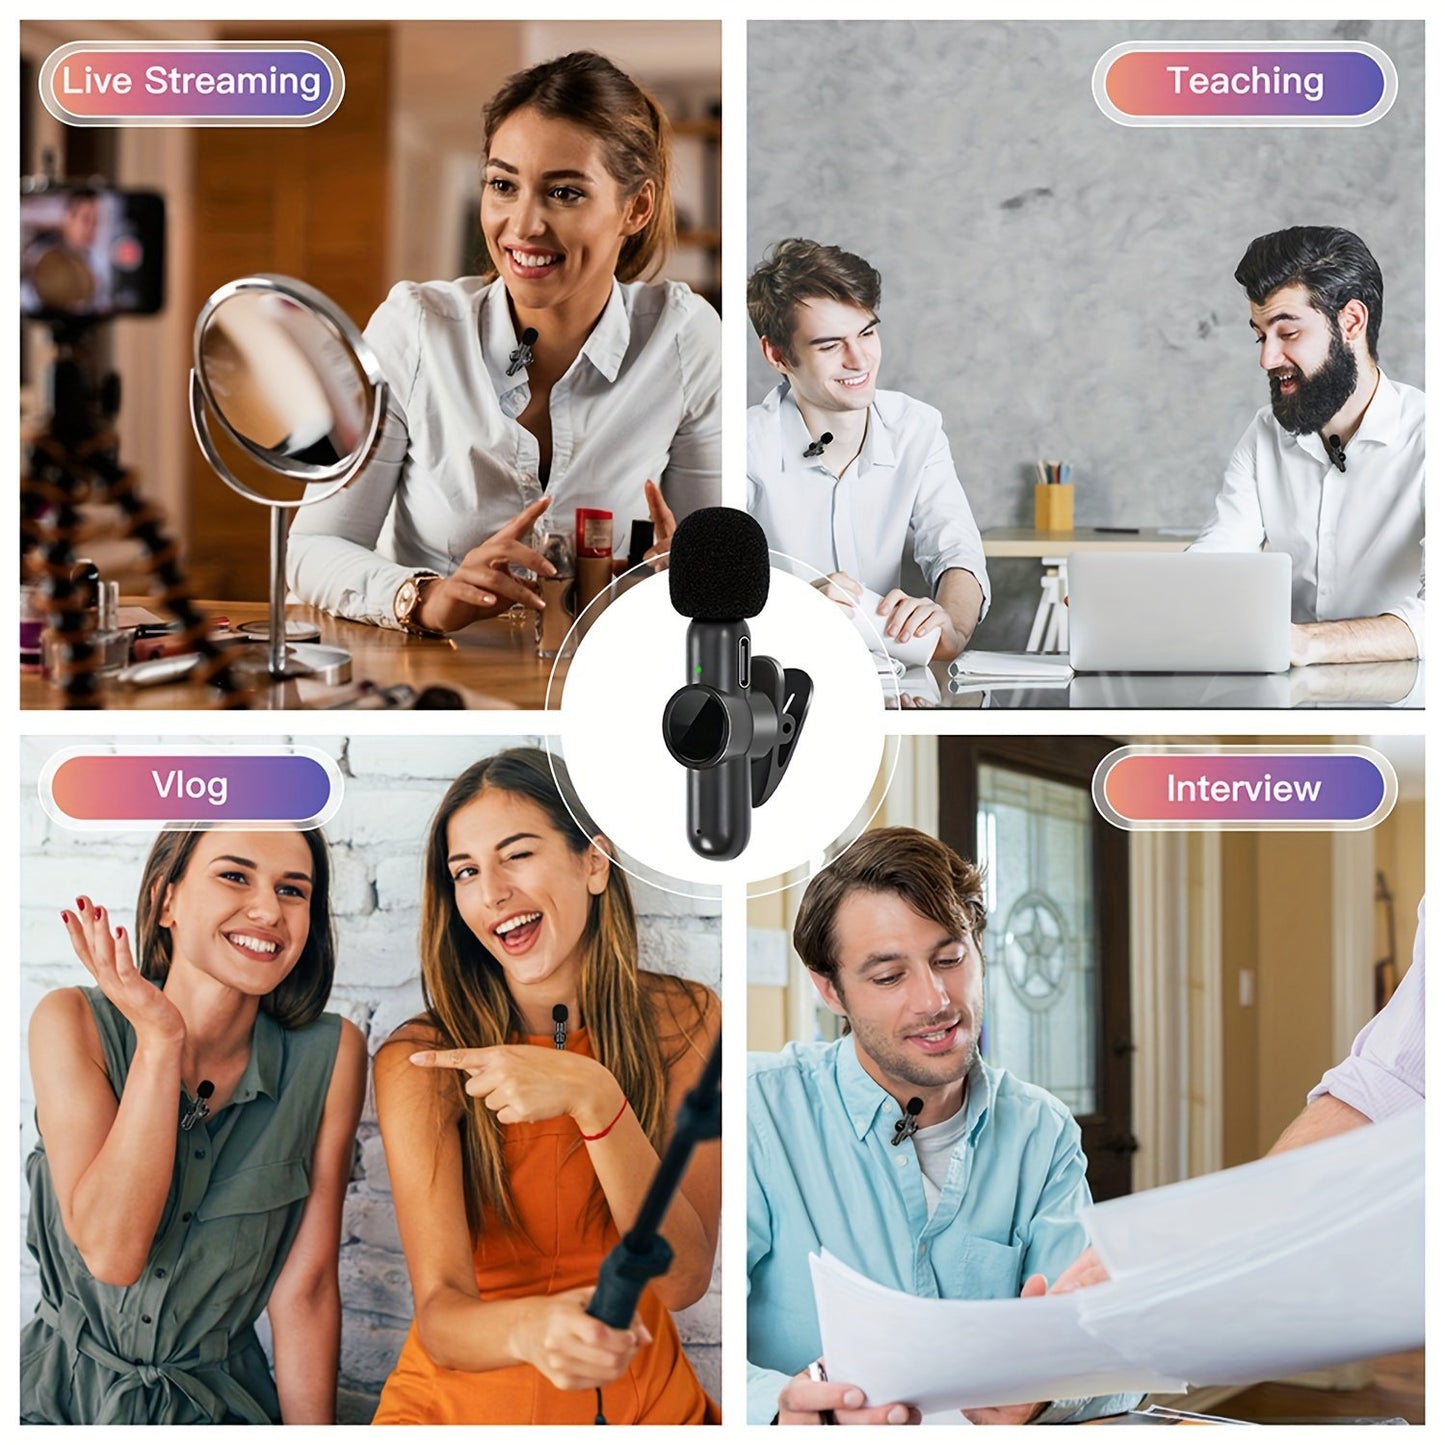 Wireless Lavalier Microphone, Clip Rotatable Wireless Microphone For IPhone For IPad Android USB-C, Cordless Clip-on Microphone, Plug And Play, Audio Video Recording, Live Streaming, Interviews.